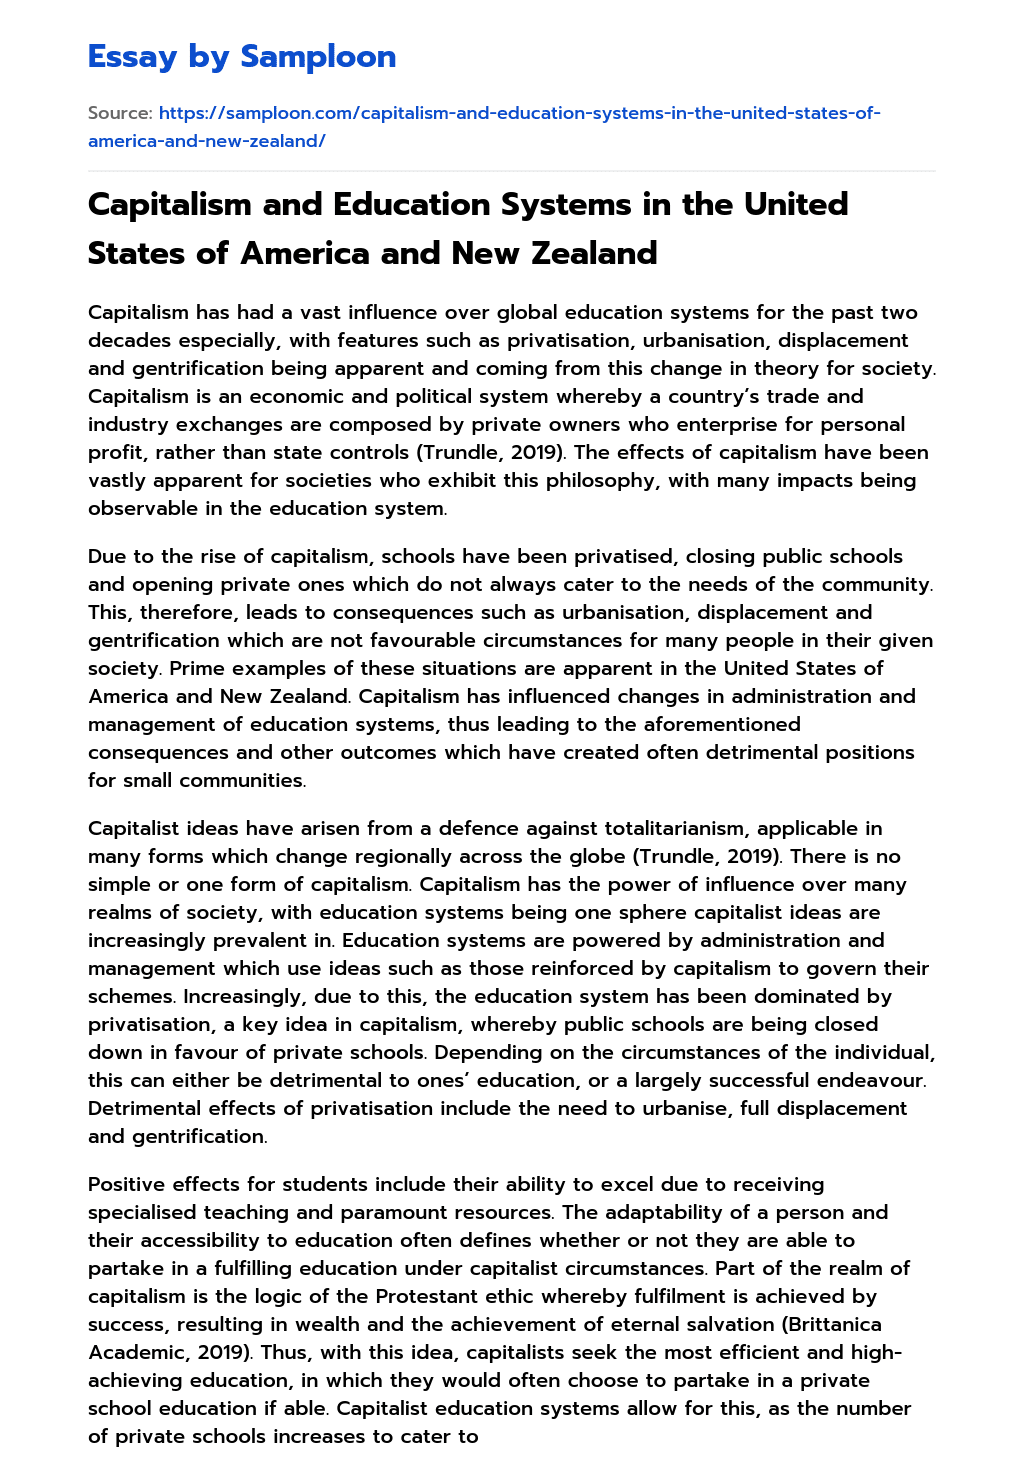 Capitalism and Education Systems in the United States of America and New Zealand essay